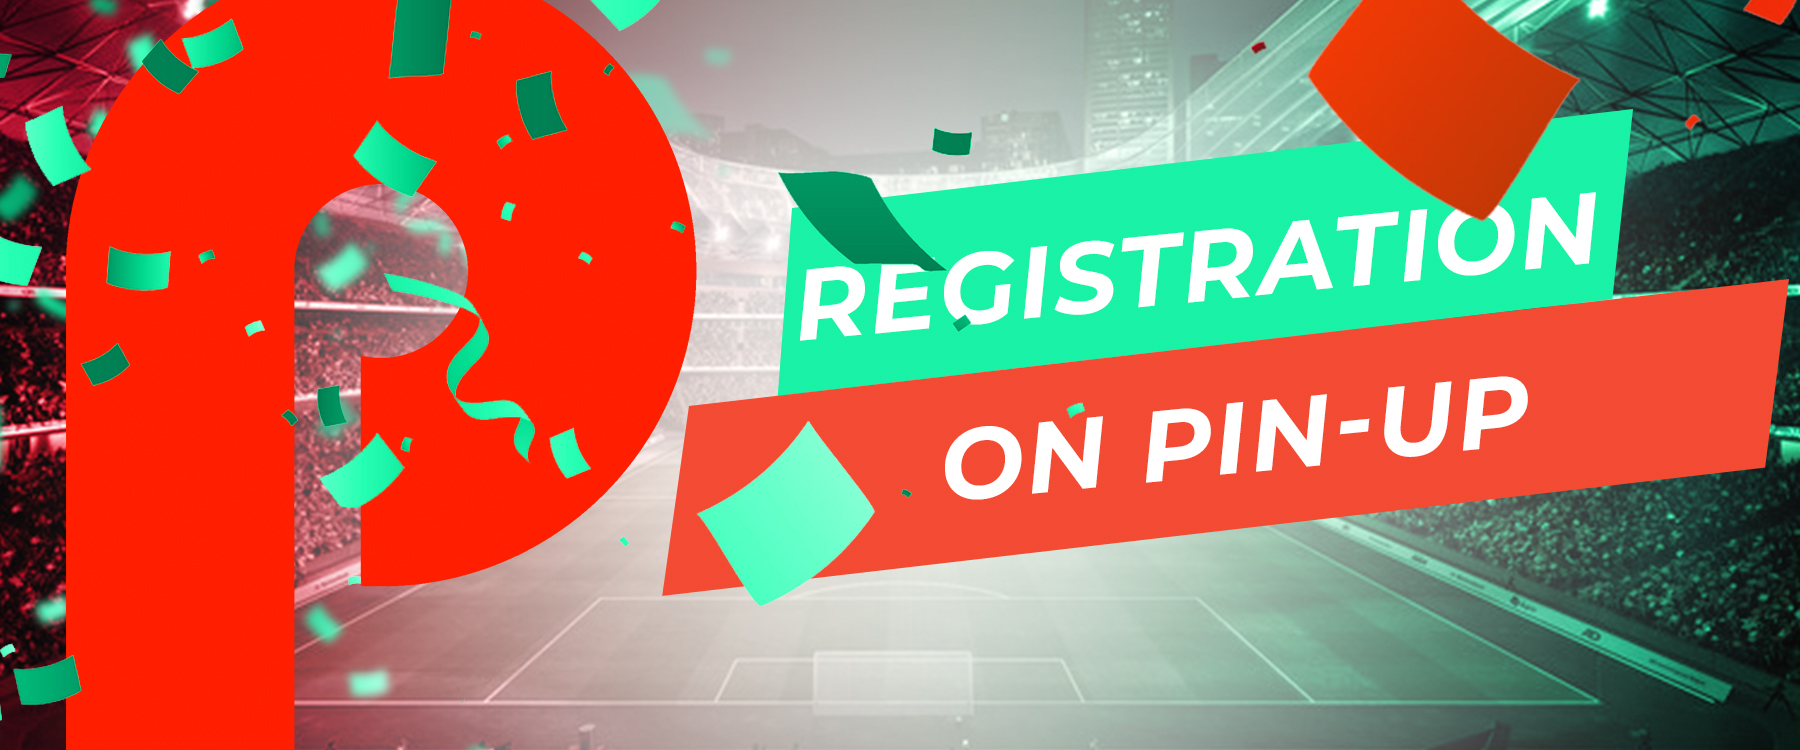 The detailed registration process on Pin Up.